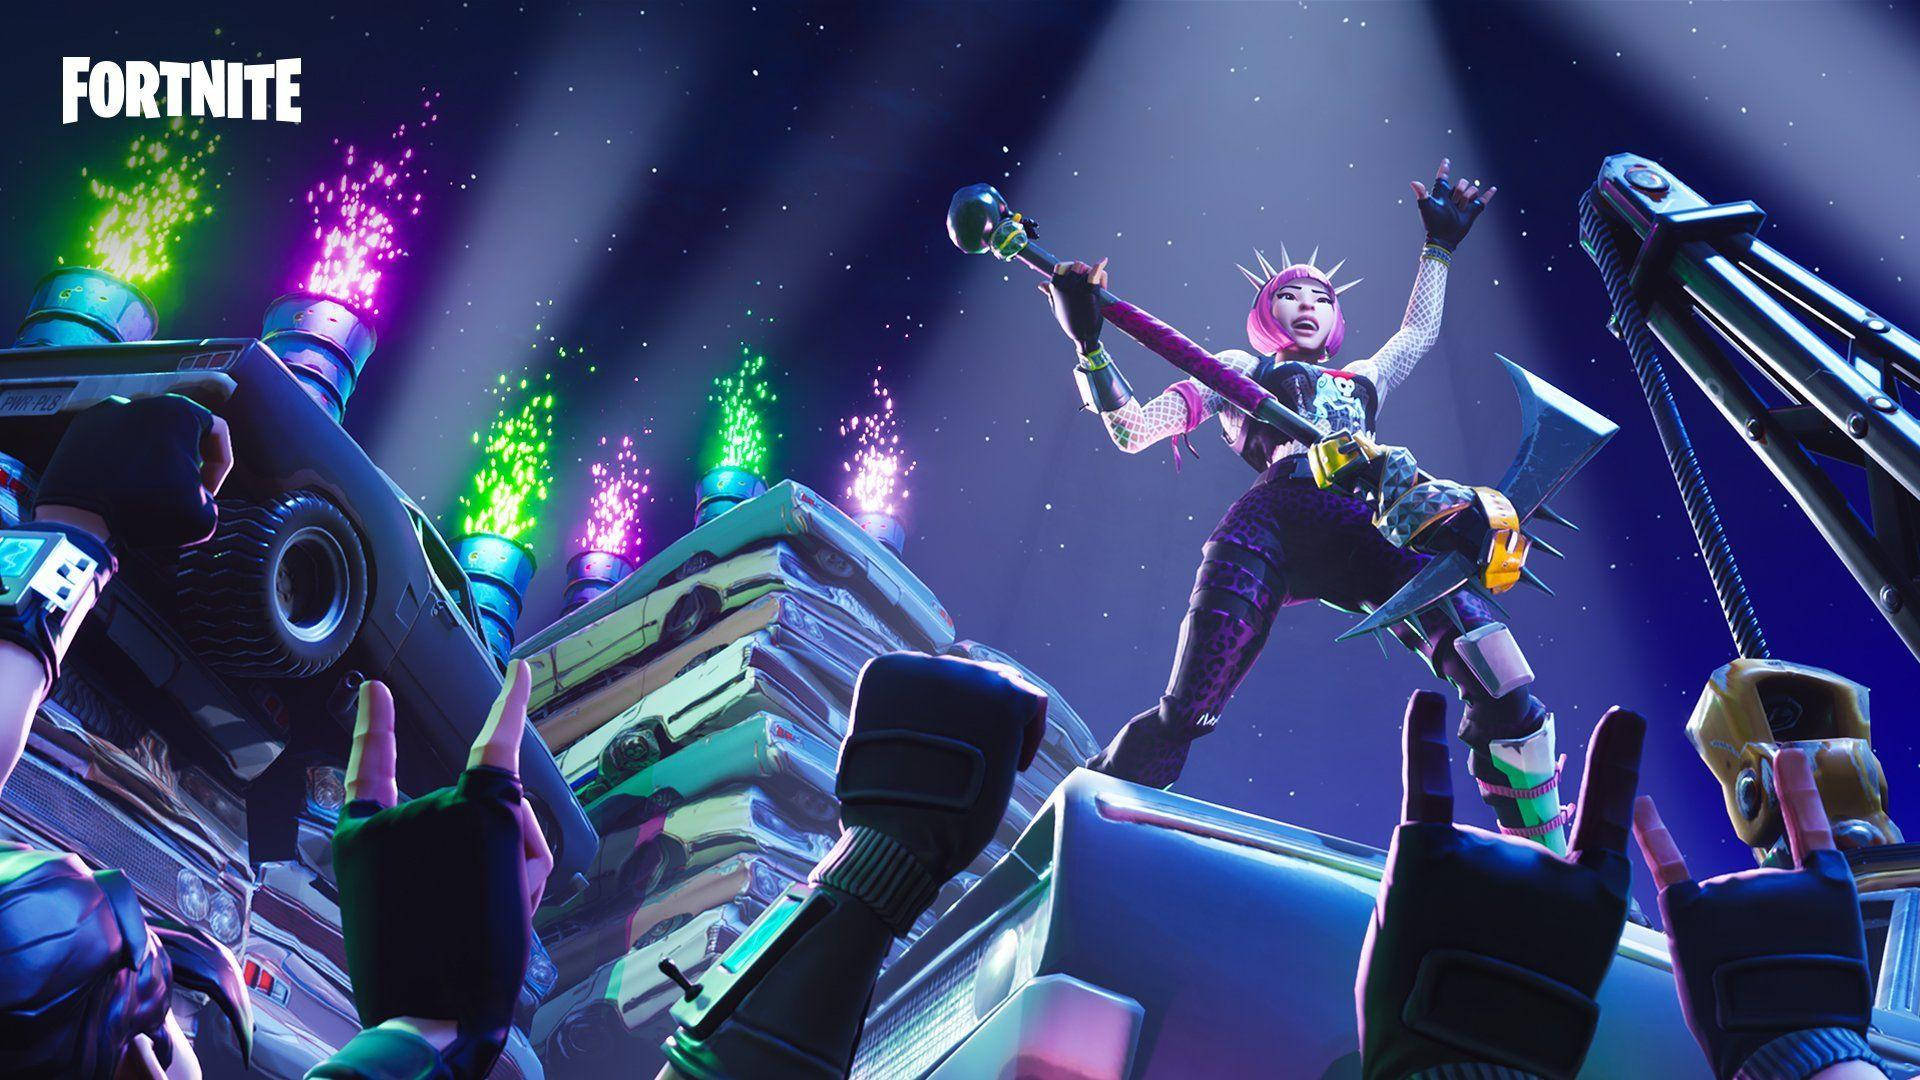 Cool Fortnite Skin at Rock and Roll Concert Wallpaper